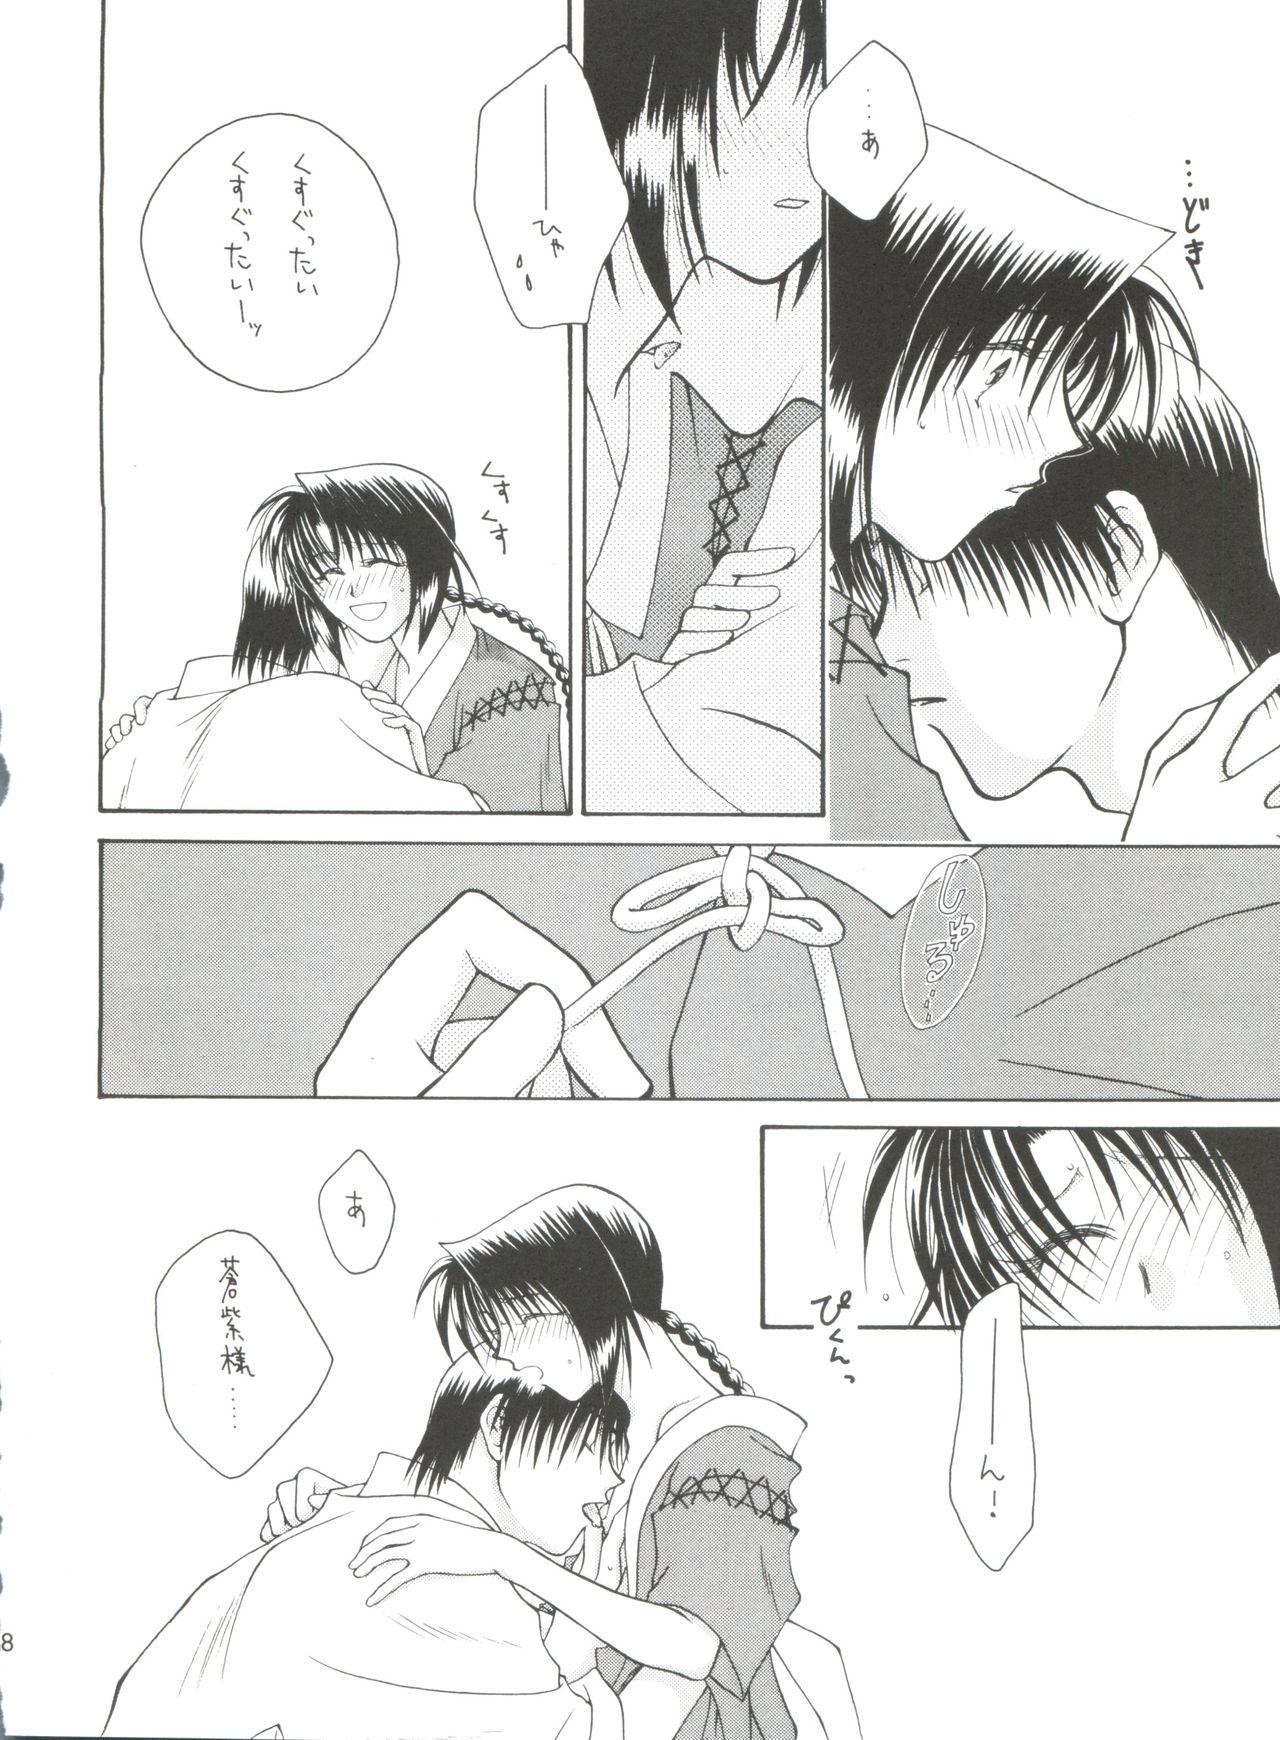 Ejaculation replay - Rurouni kenshin Exposed - Page 9